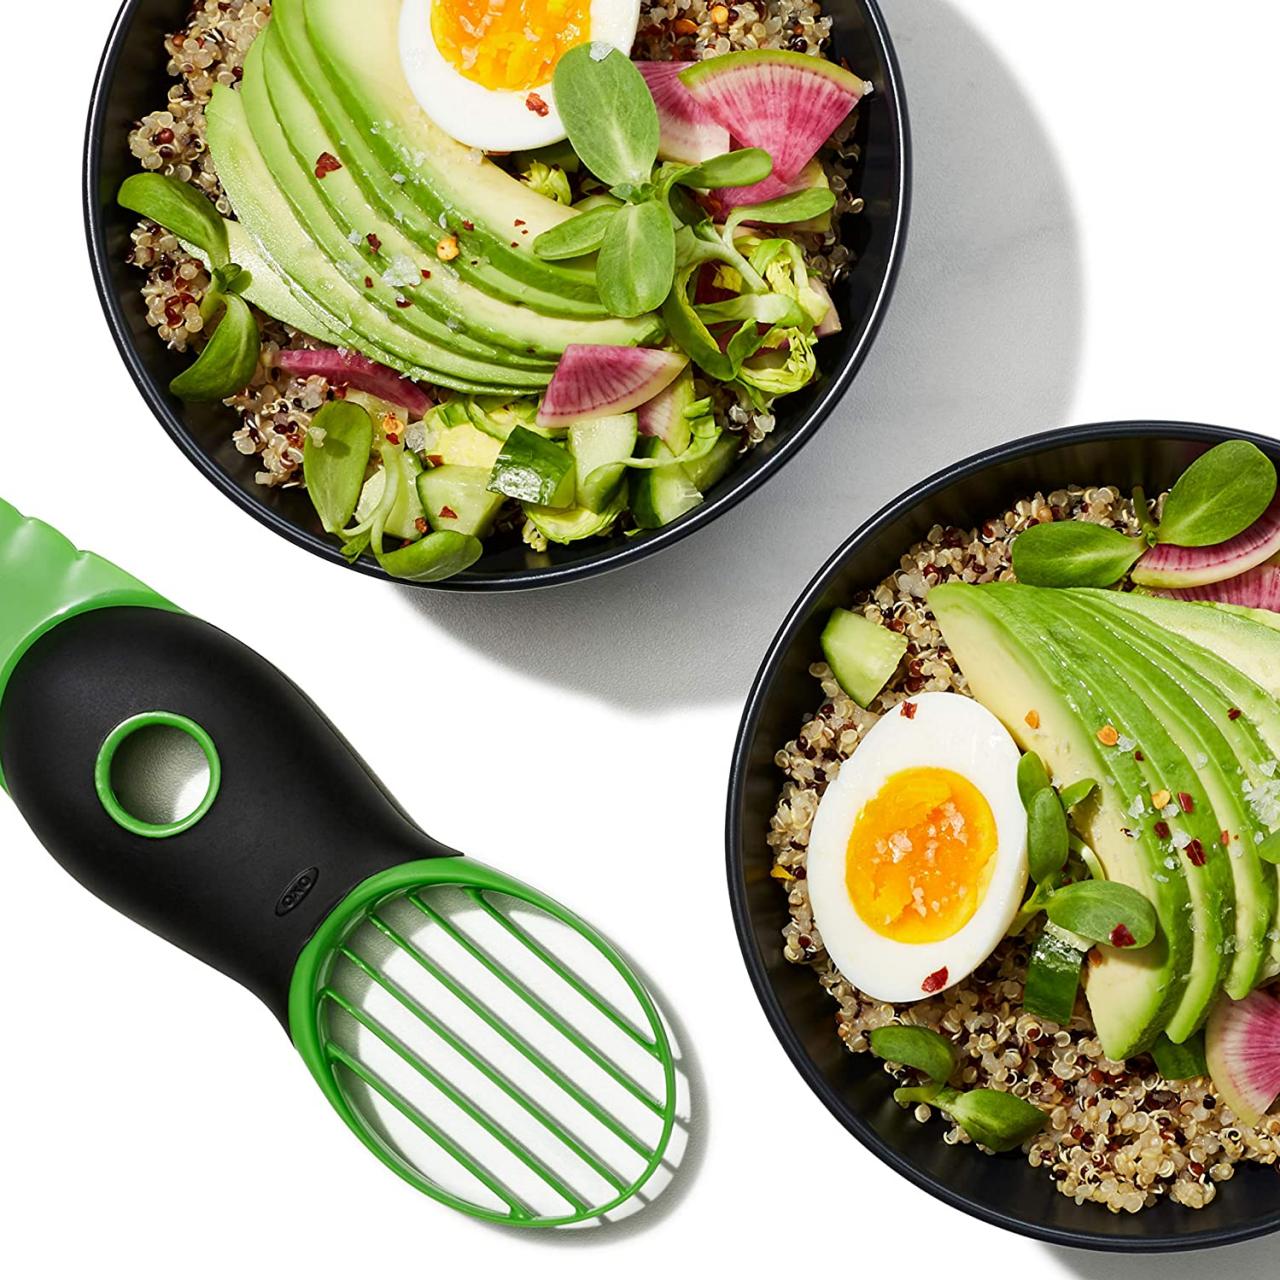 https://food.fnr.sndimg.com/content/dam/images/food/products/2021/7/13/rx_oxo-avocado-slicer.jpeg.rend.hgtvcom.1280.1280.suffix/1626200818409.jpeg